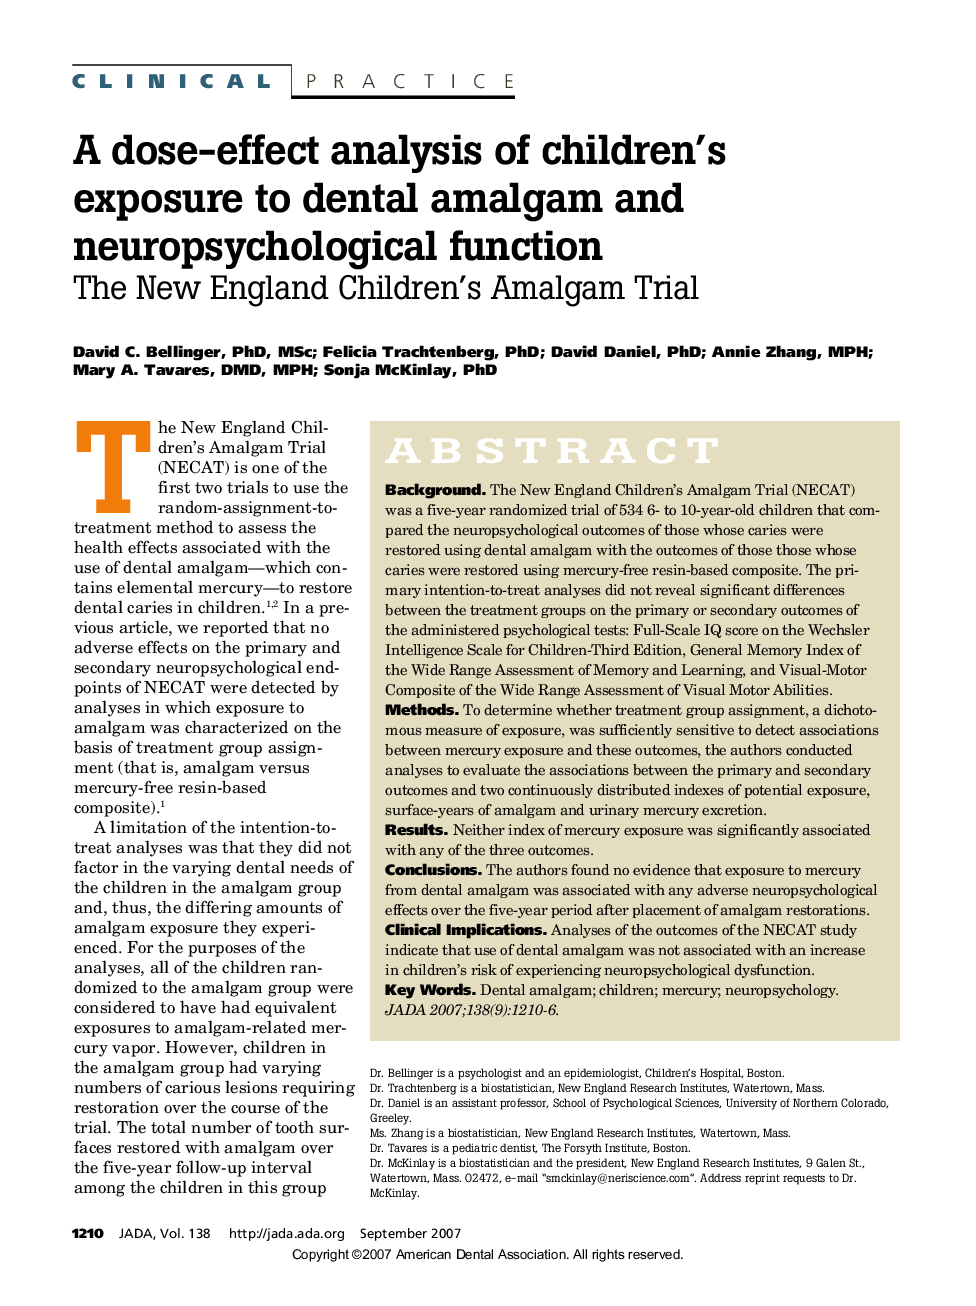 A Dose-Effect Analysis of Children's Exposure to Dental Amalgam and Neuropsychological Function : The New England Children's Amalgam Trial